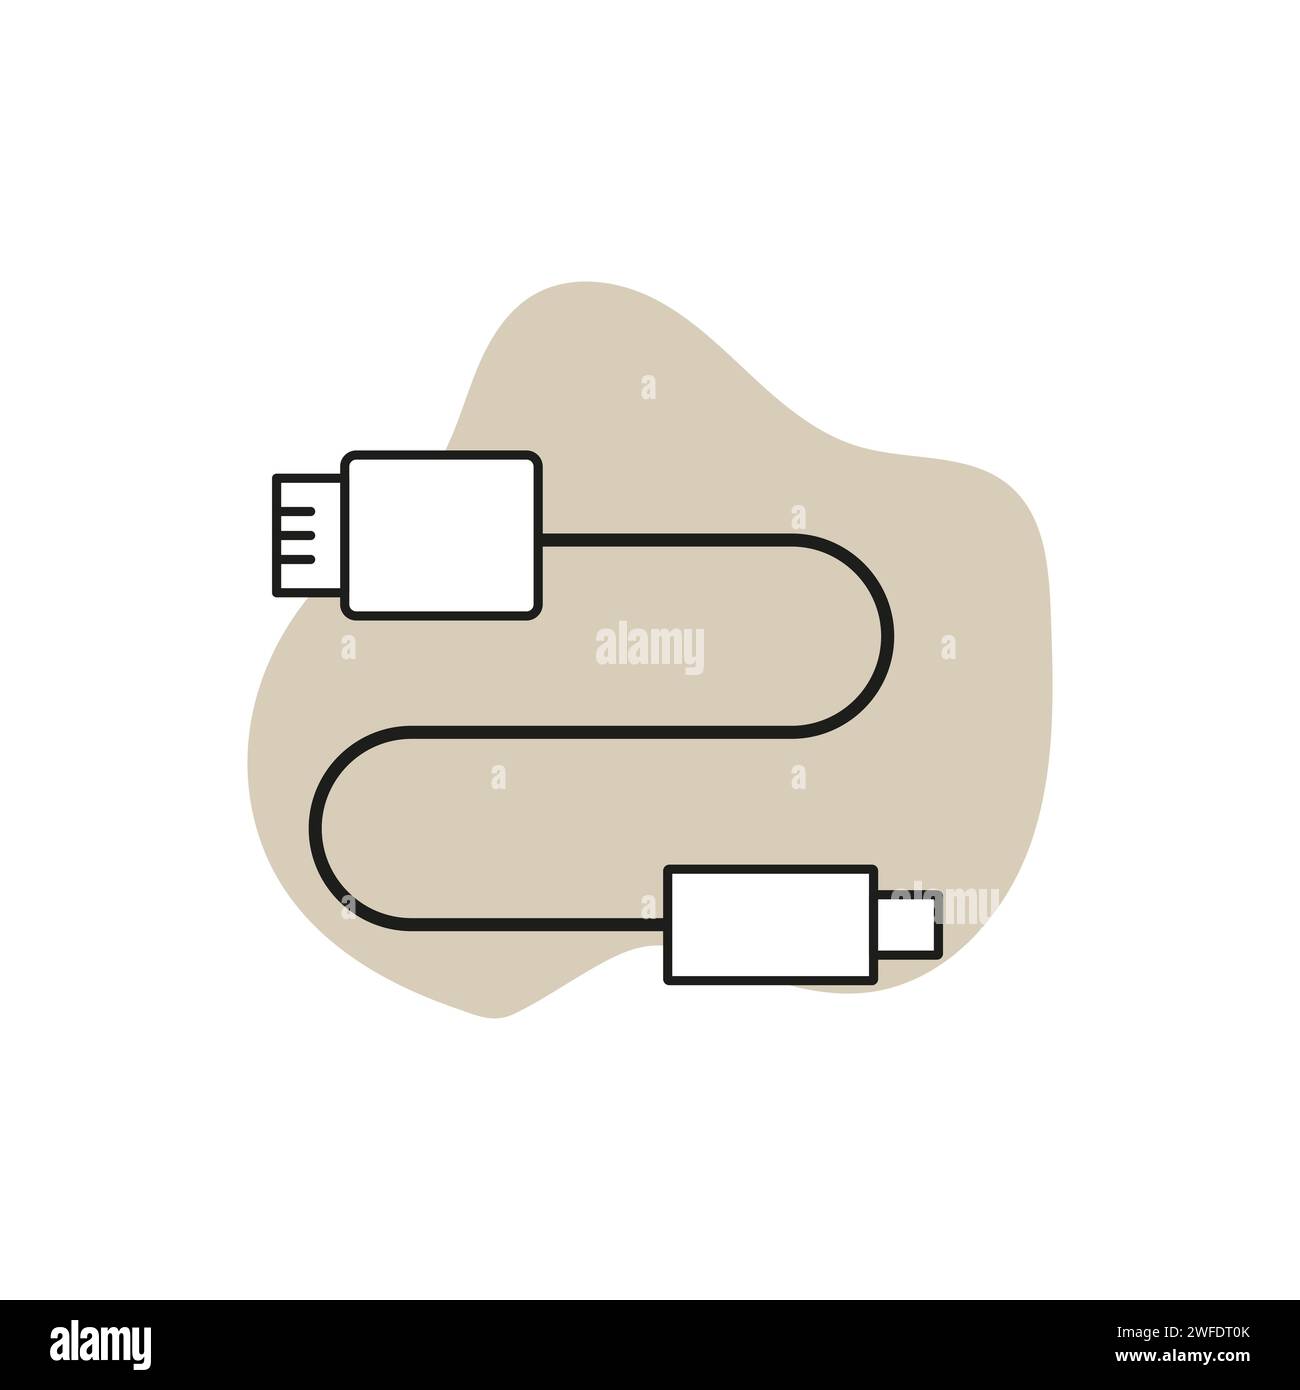 Usb cable ot connect. Technology devices. Connector, typ c cable icon. Hdmi cable icon. Vector illustration. Eps 10. Stock image. Stock Vector